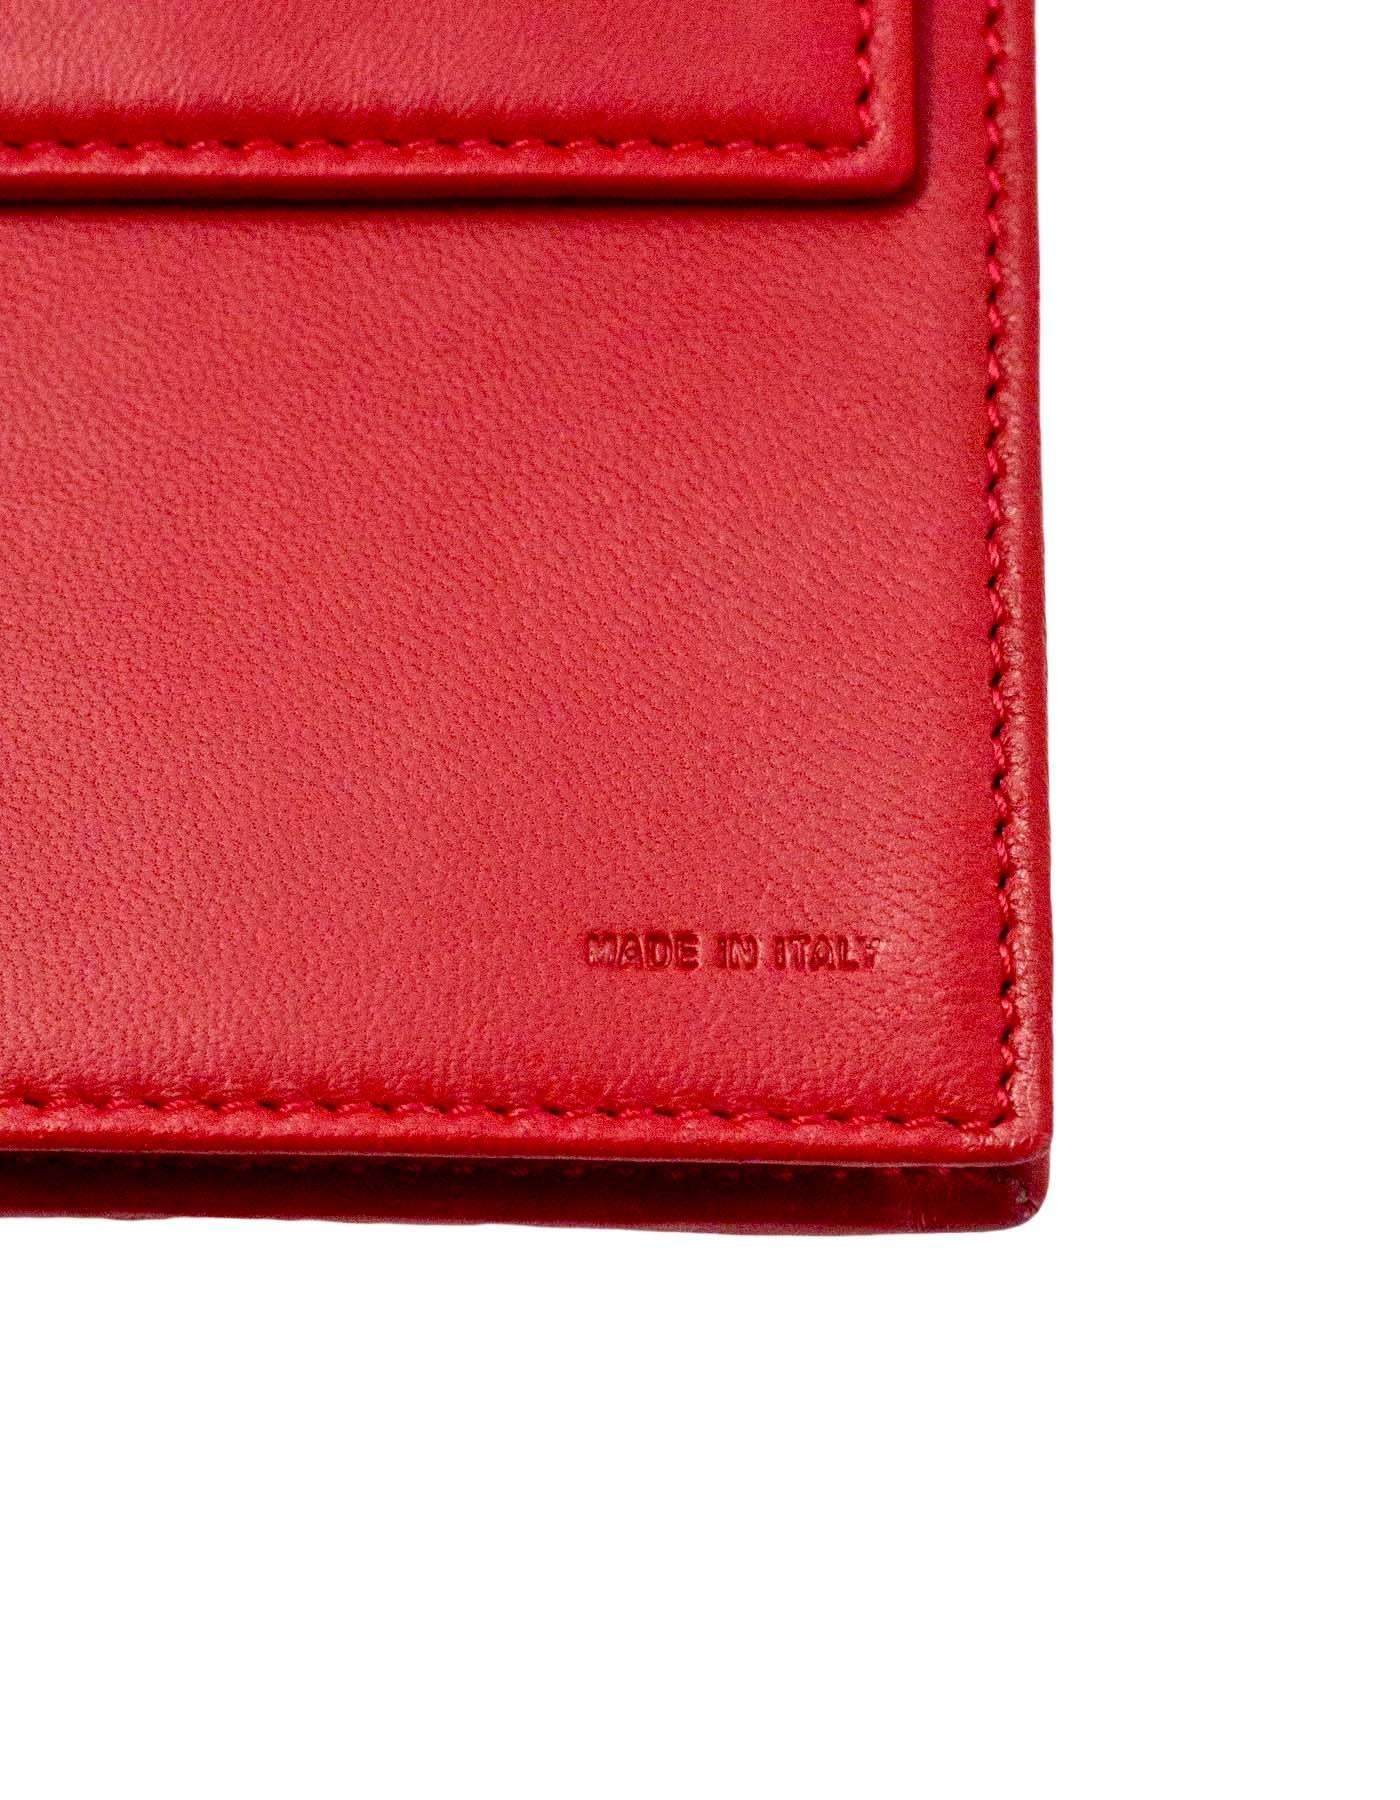 Fendi Red Leather Embossed Logo Chain Wallet WOC Bag 2